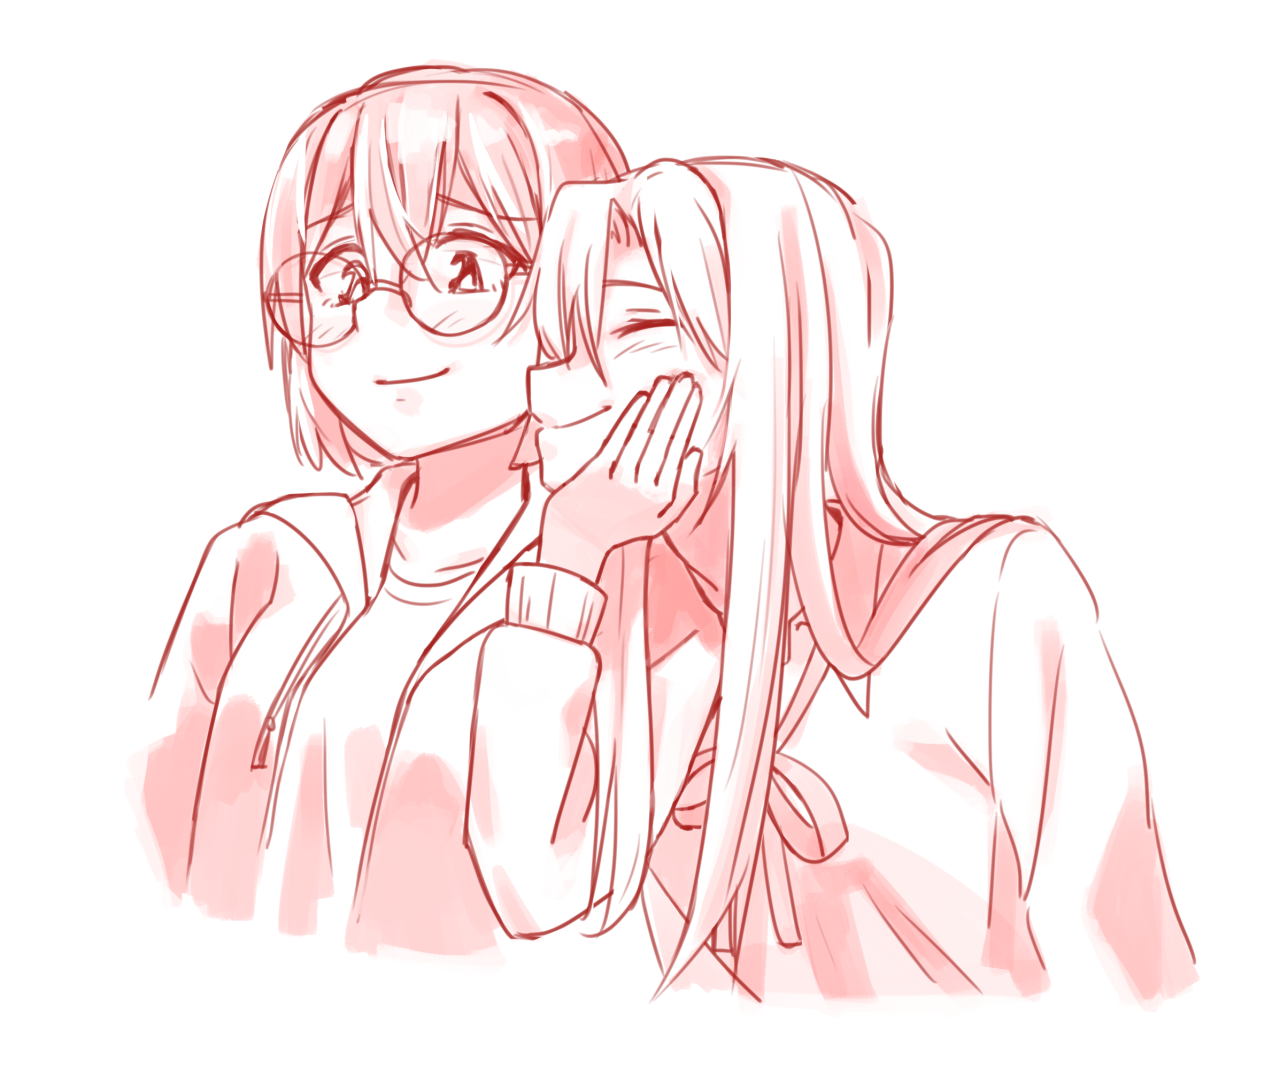 There's only Yes! [Otherside Picnic] : r/wholesomeyuri